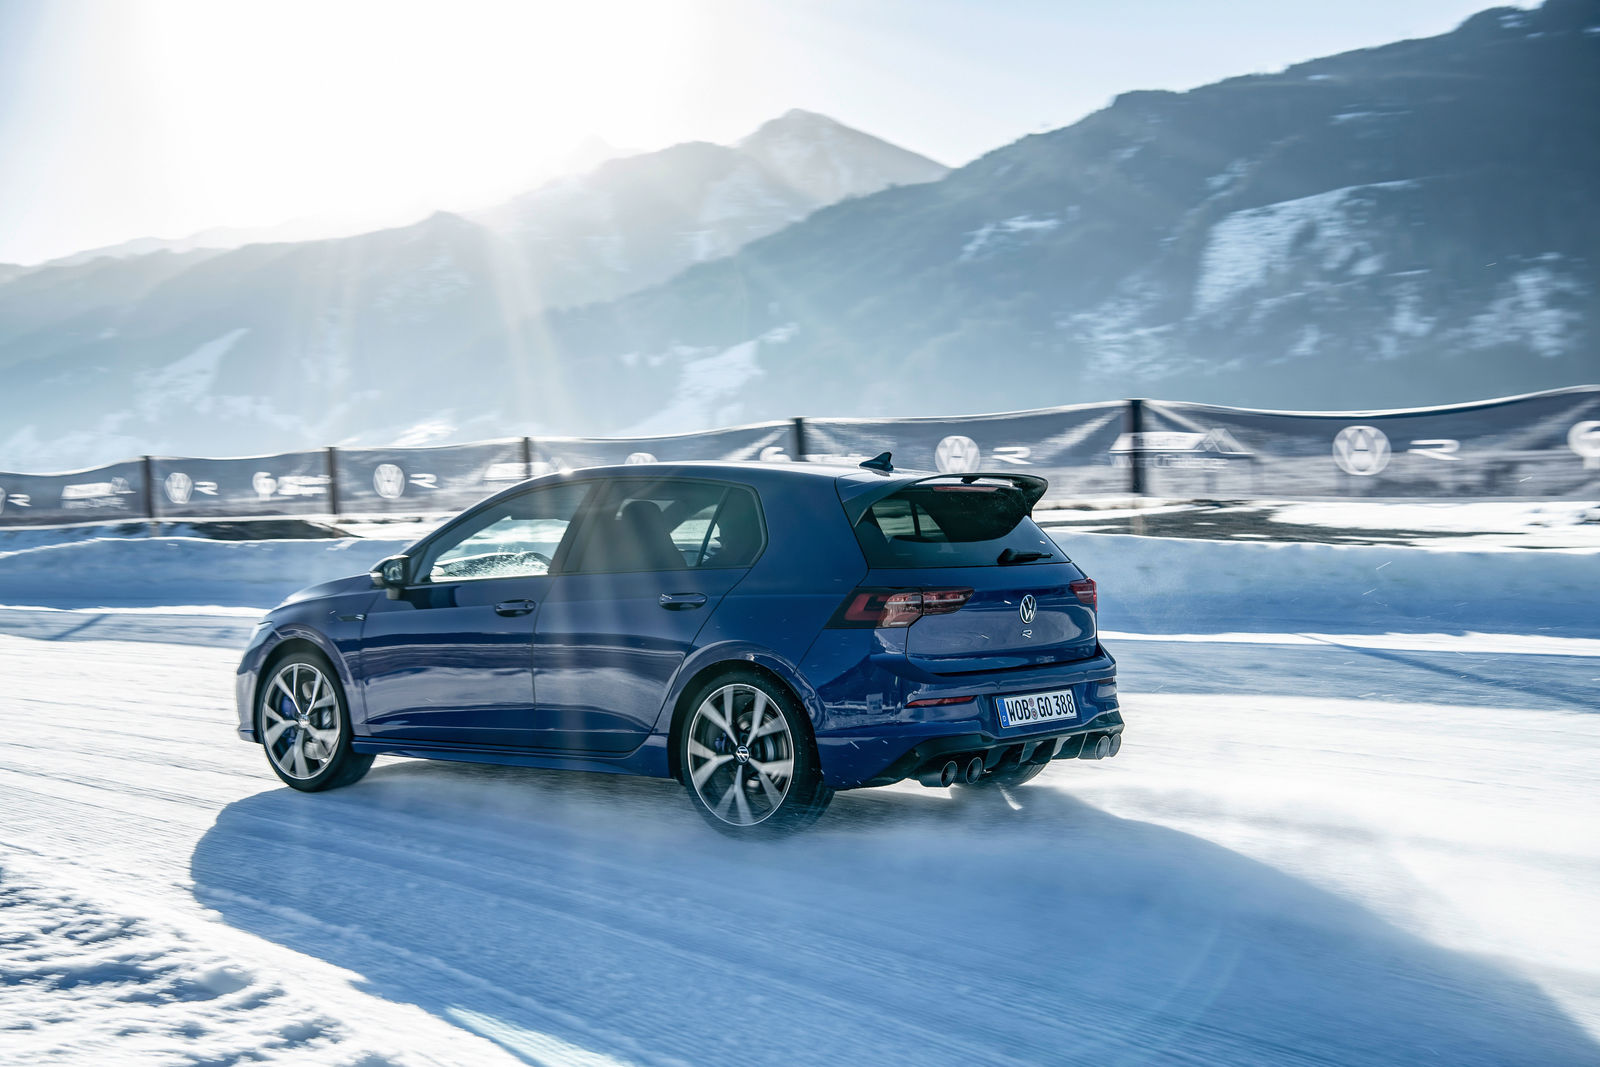 VW Hatchback Challenge: Test-Driving the All-New 2022 GTI and Golf R